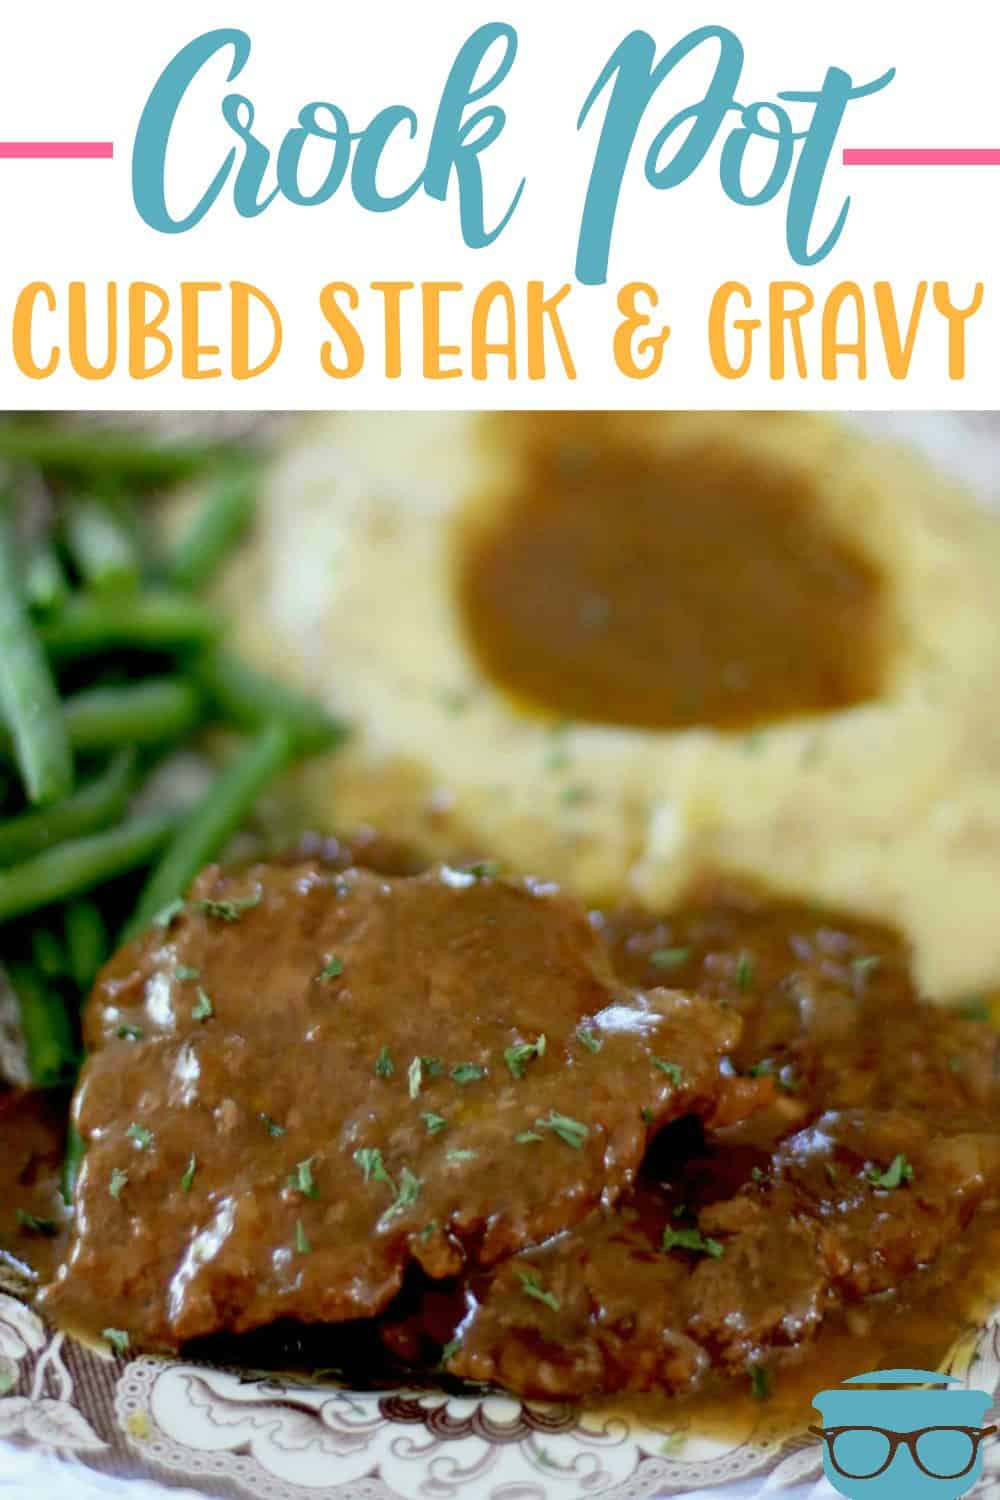 Crock Pot Cubed Steak and Gravy served on a plate with green beans and mashed potatoes. Recipe from The Country Cook.